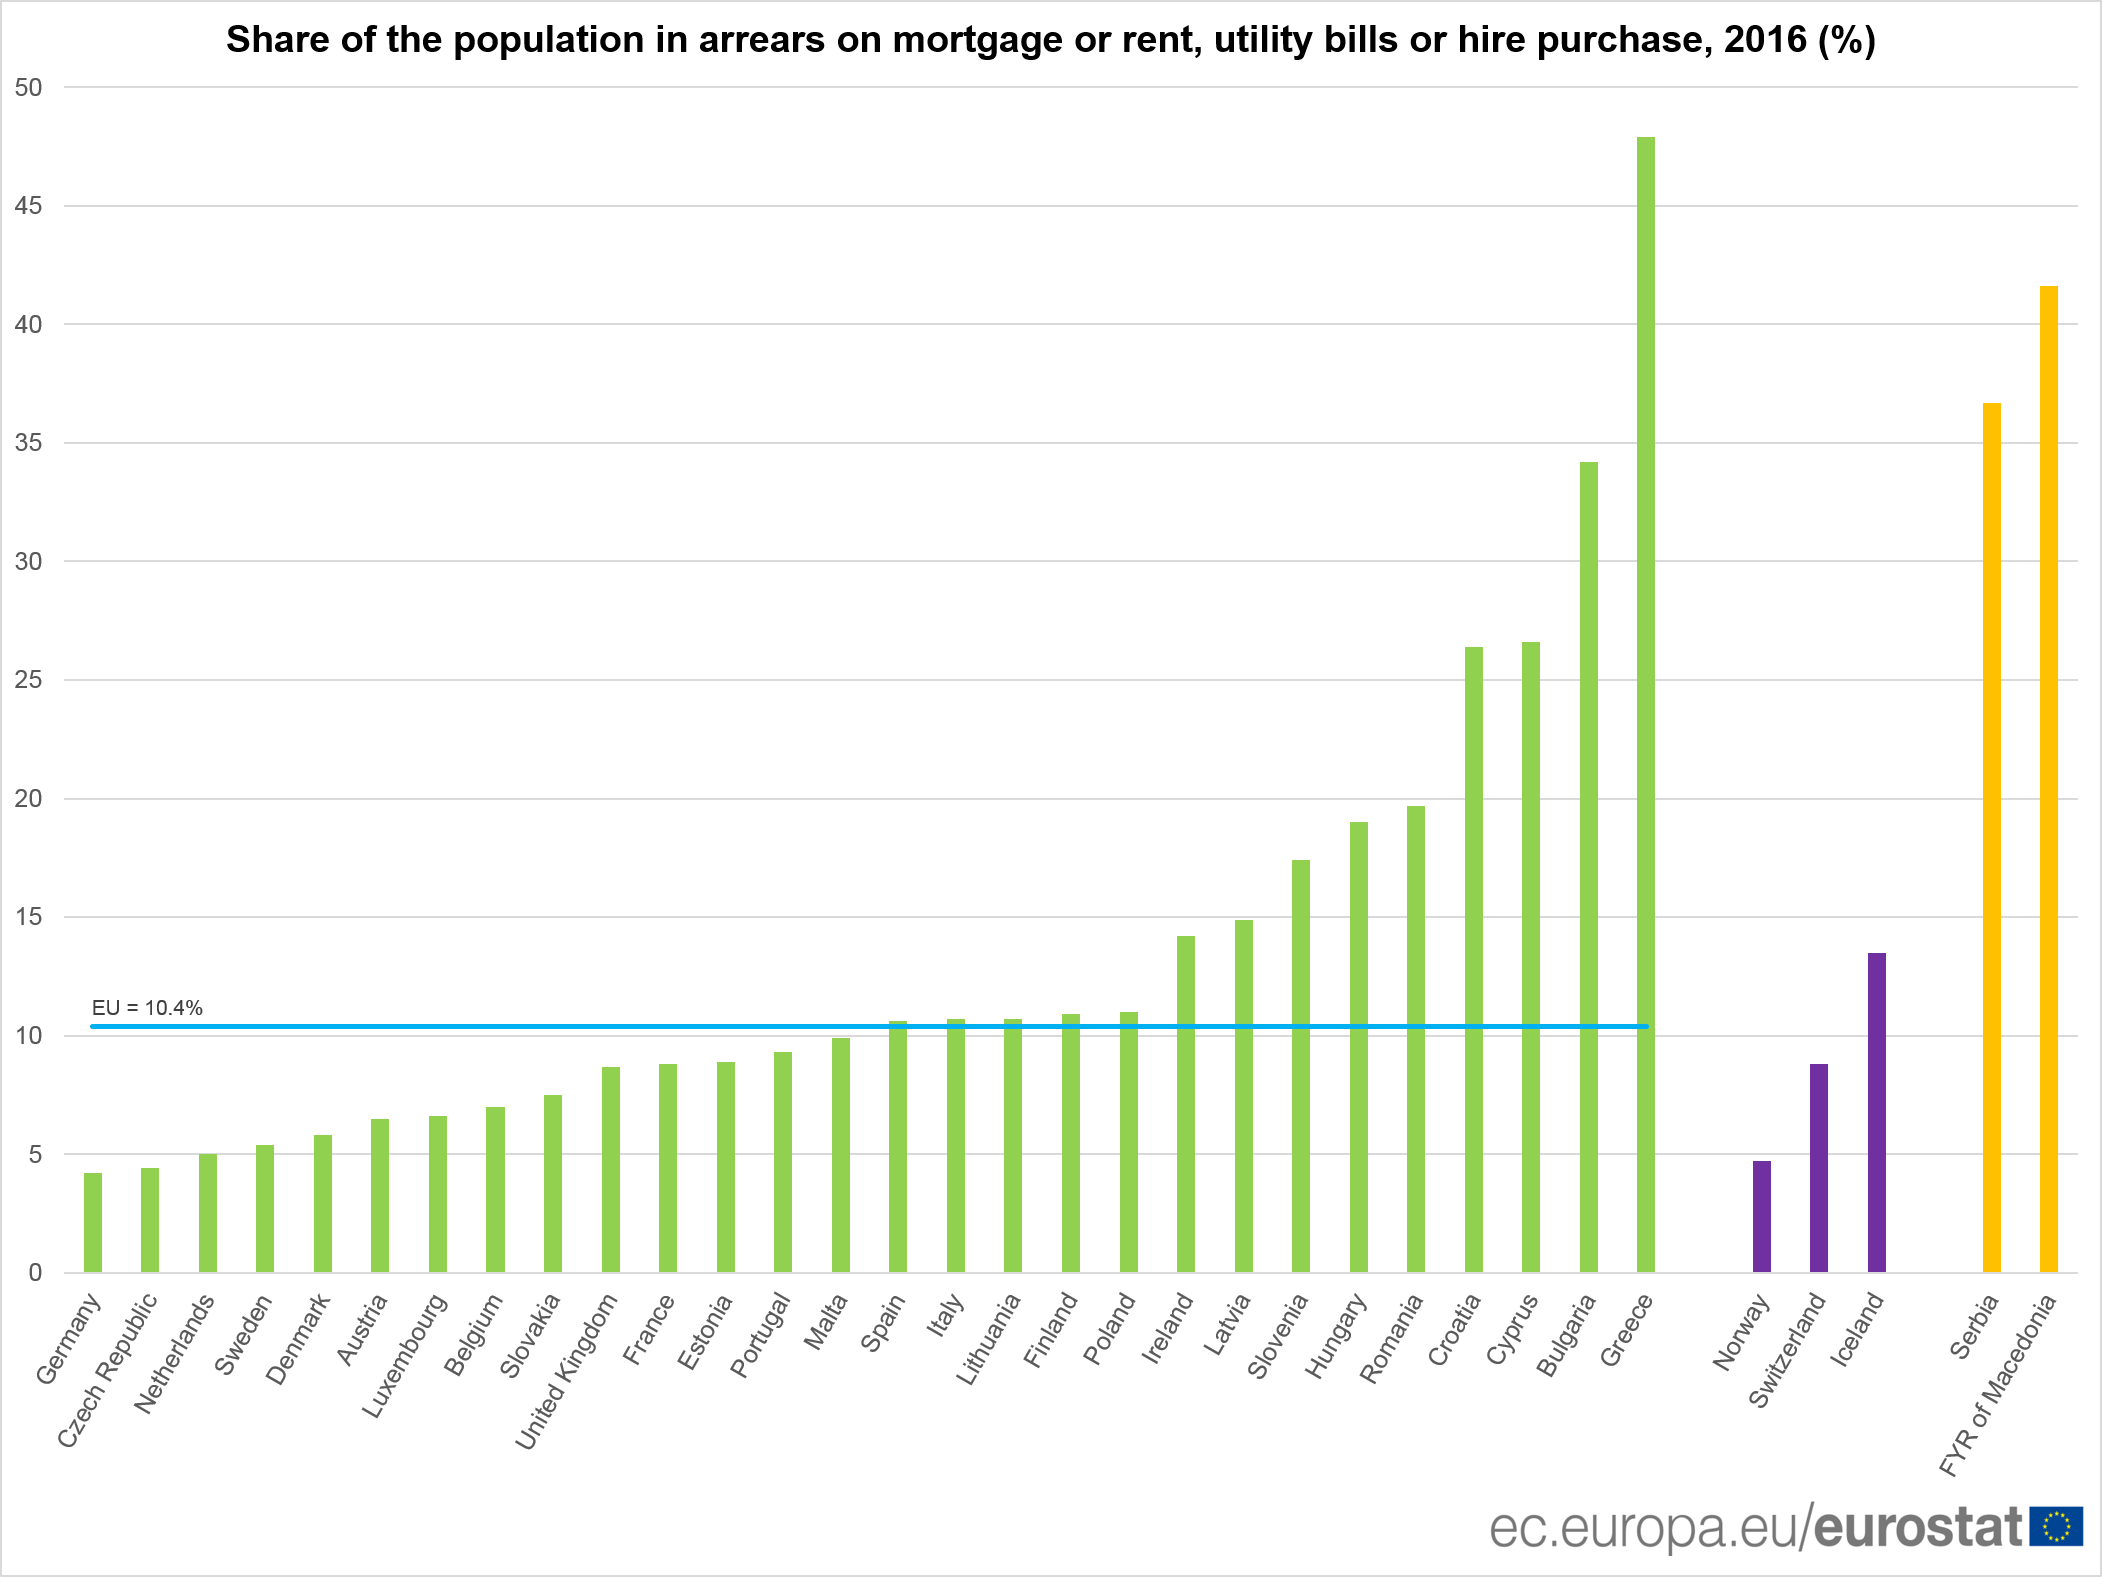 Share of the population, which is in debt (mortgage, rent, utilities, hire purchases) by country.